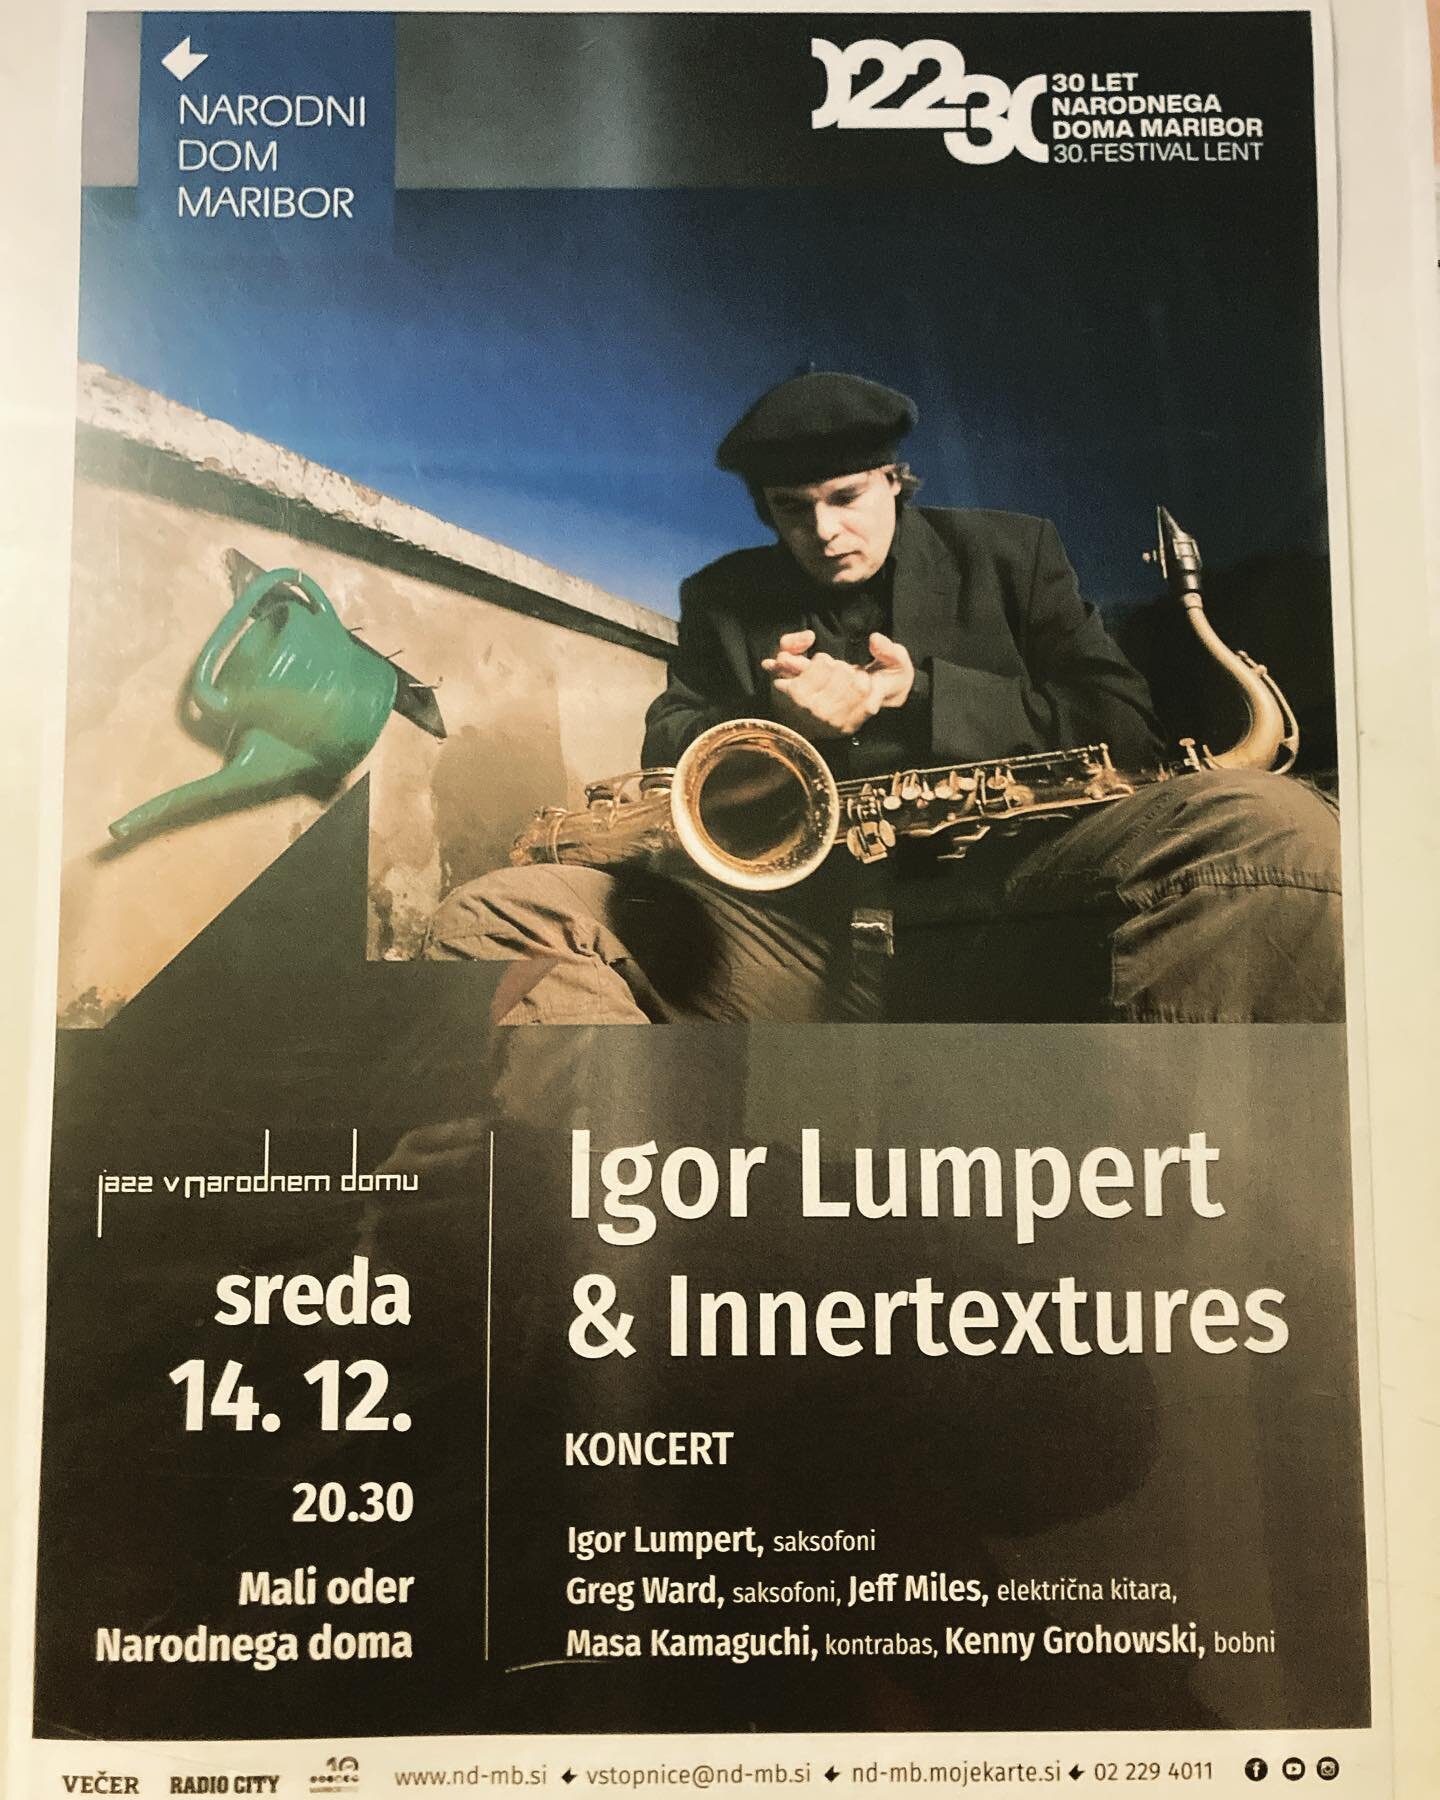 Tonight Innertextures with @fittedphonic on alto sax, @kennygrohowski on drums and @masabilly on bass at Narodni Dom in Maribor, Slovenia. We hit at 20:30.Hope to see you.#igorlumpertontour #kennygrohowski#gregward #cleanfeed#igorlumpert